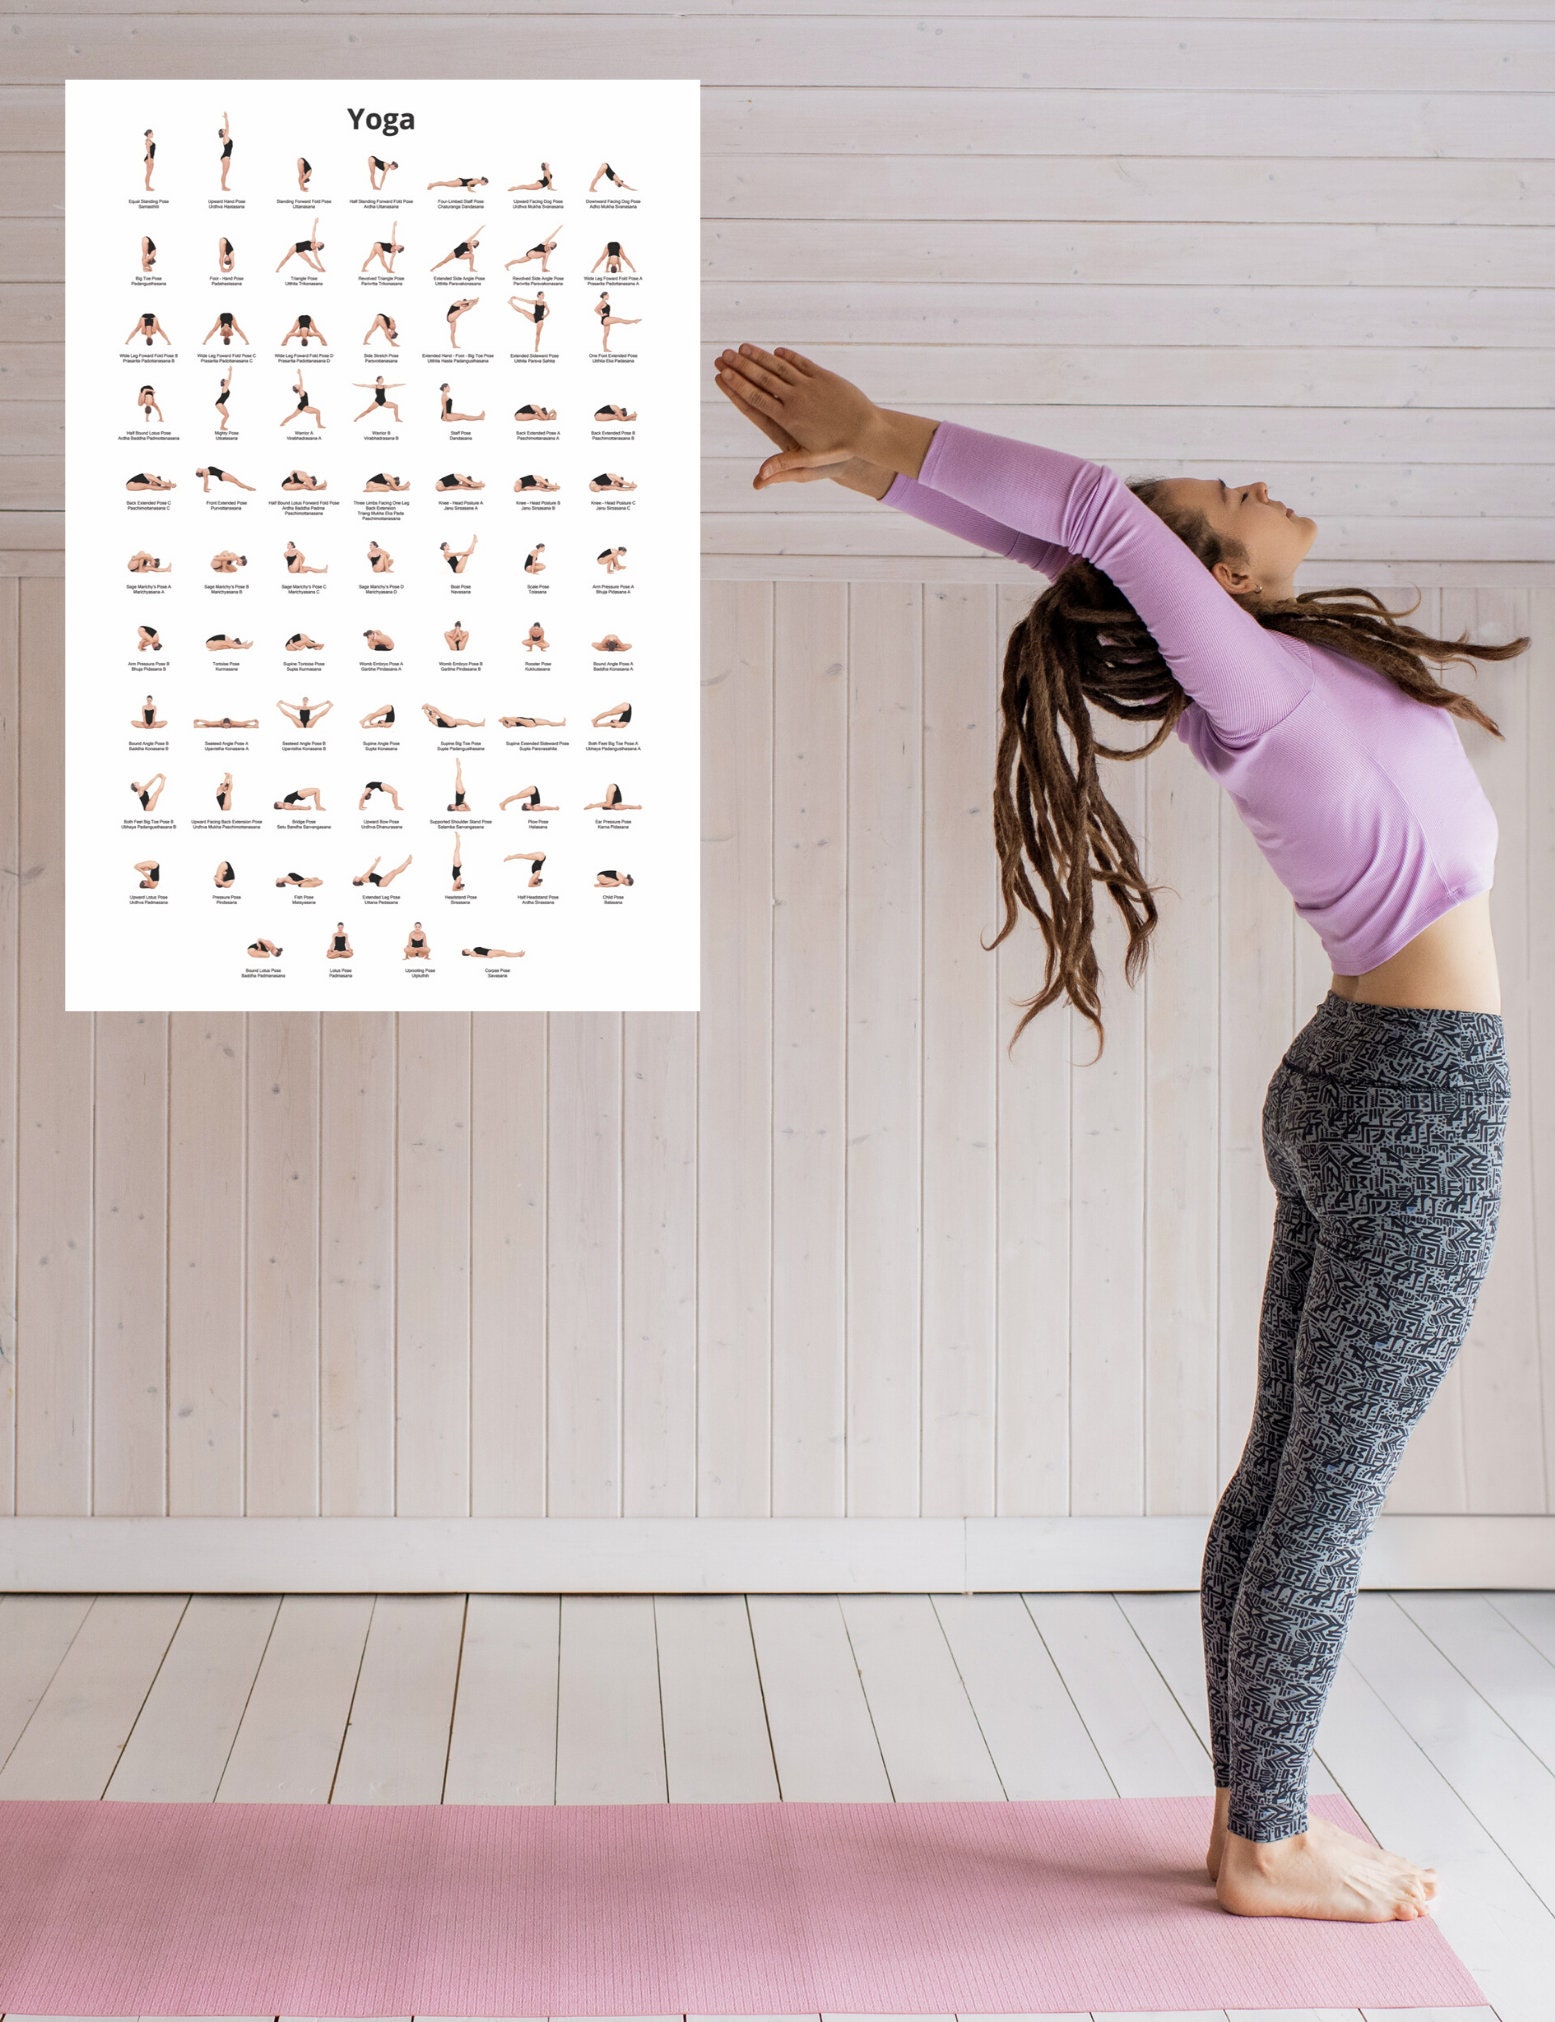 Hot Yoga Floor Chart and Wall Poster (Regular Poster, 24 x 36